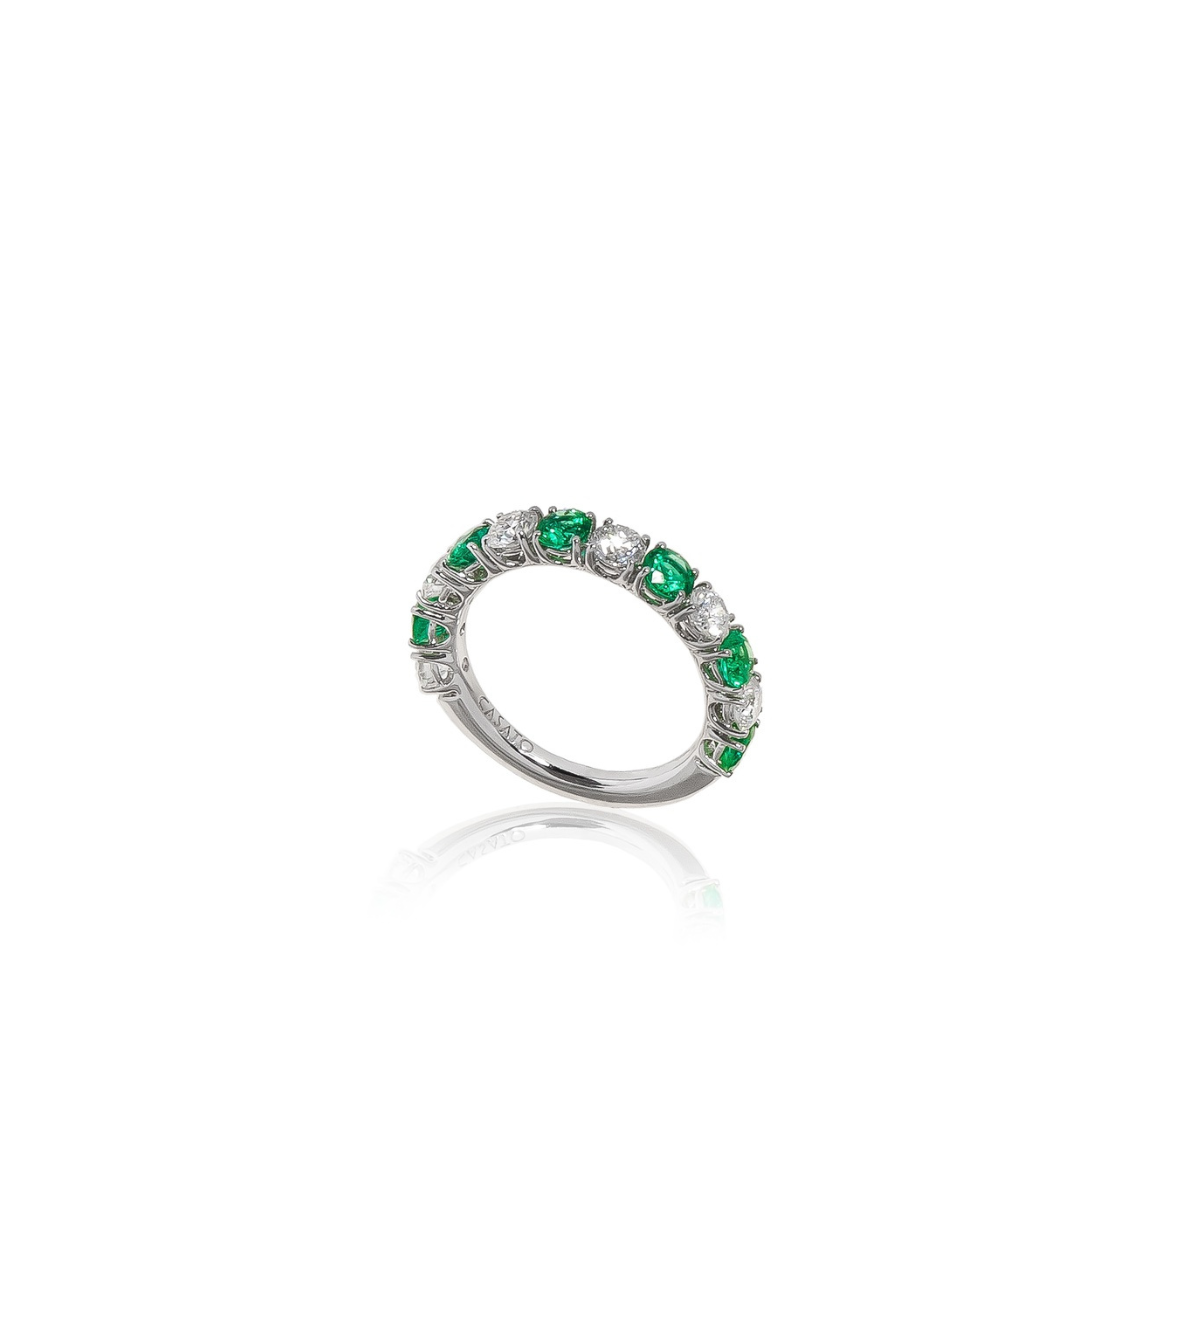 White Gold Eternity Ring with Diamonds and Emeralds 04533 by Mentis Collection